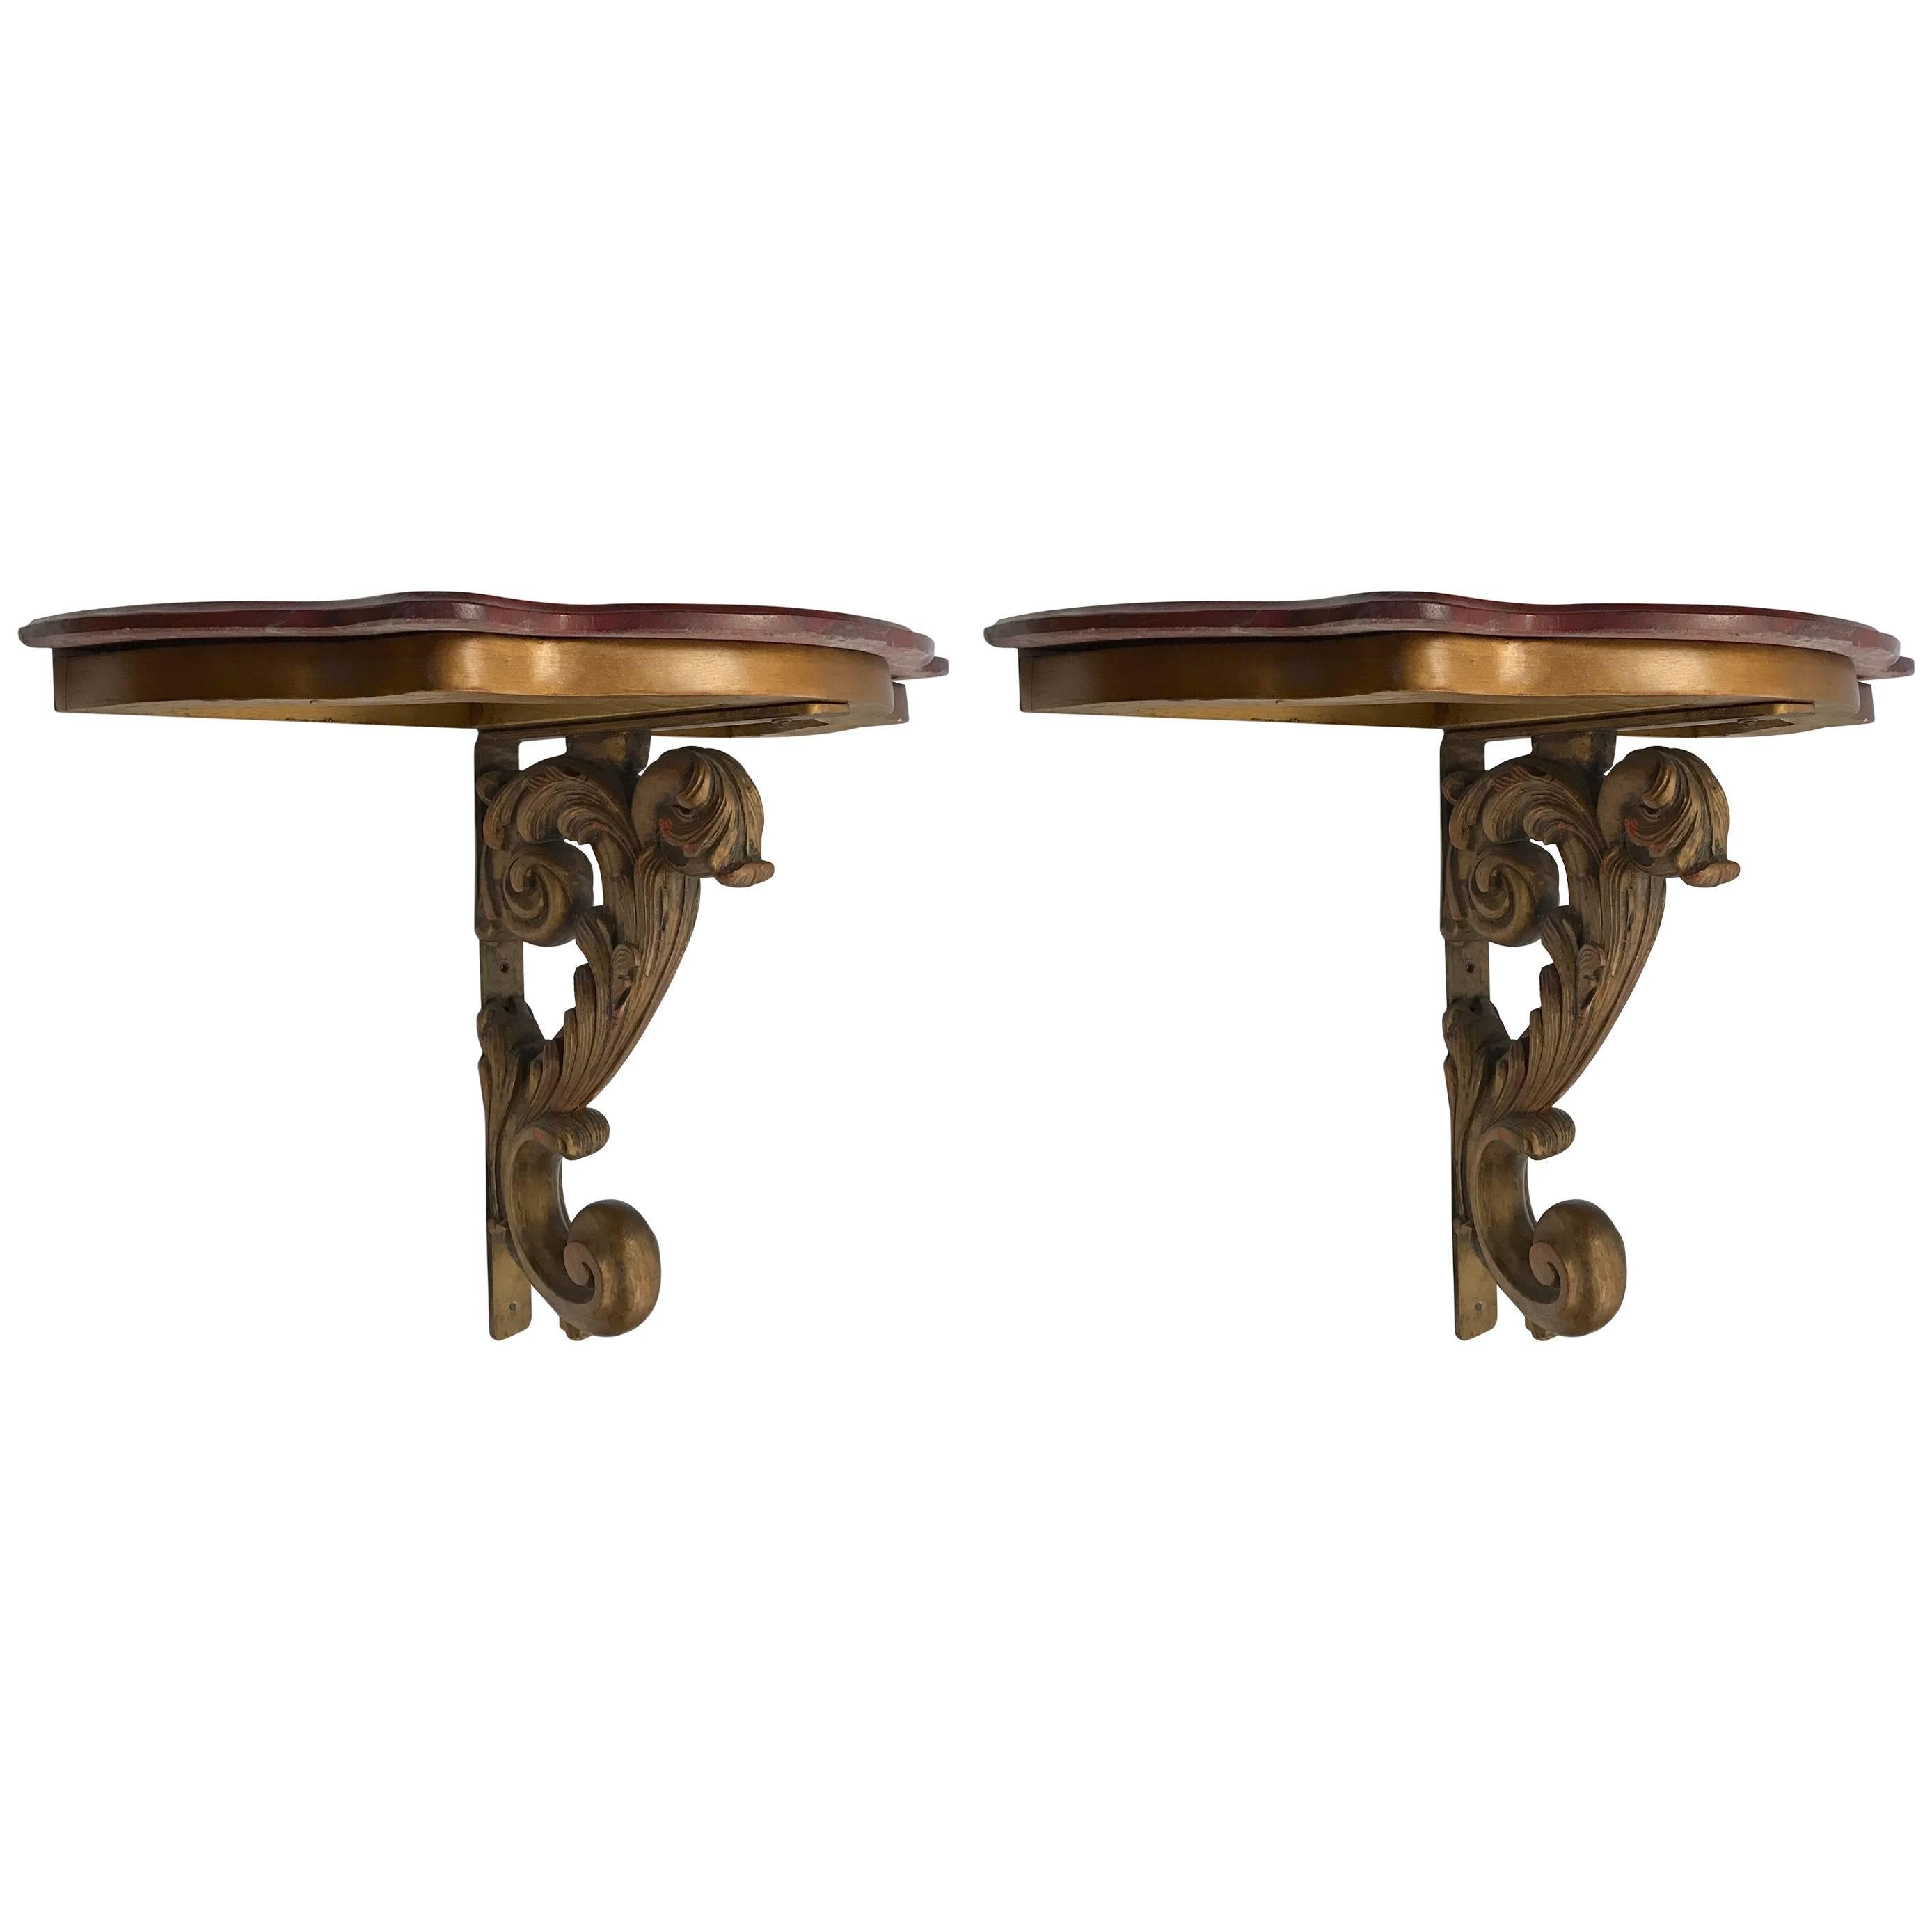 Pair of Italian Giltwood Marble-Top Demilune Console Tables